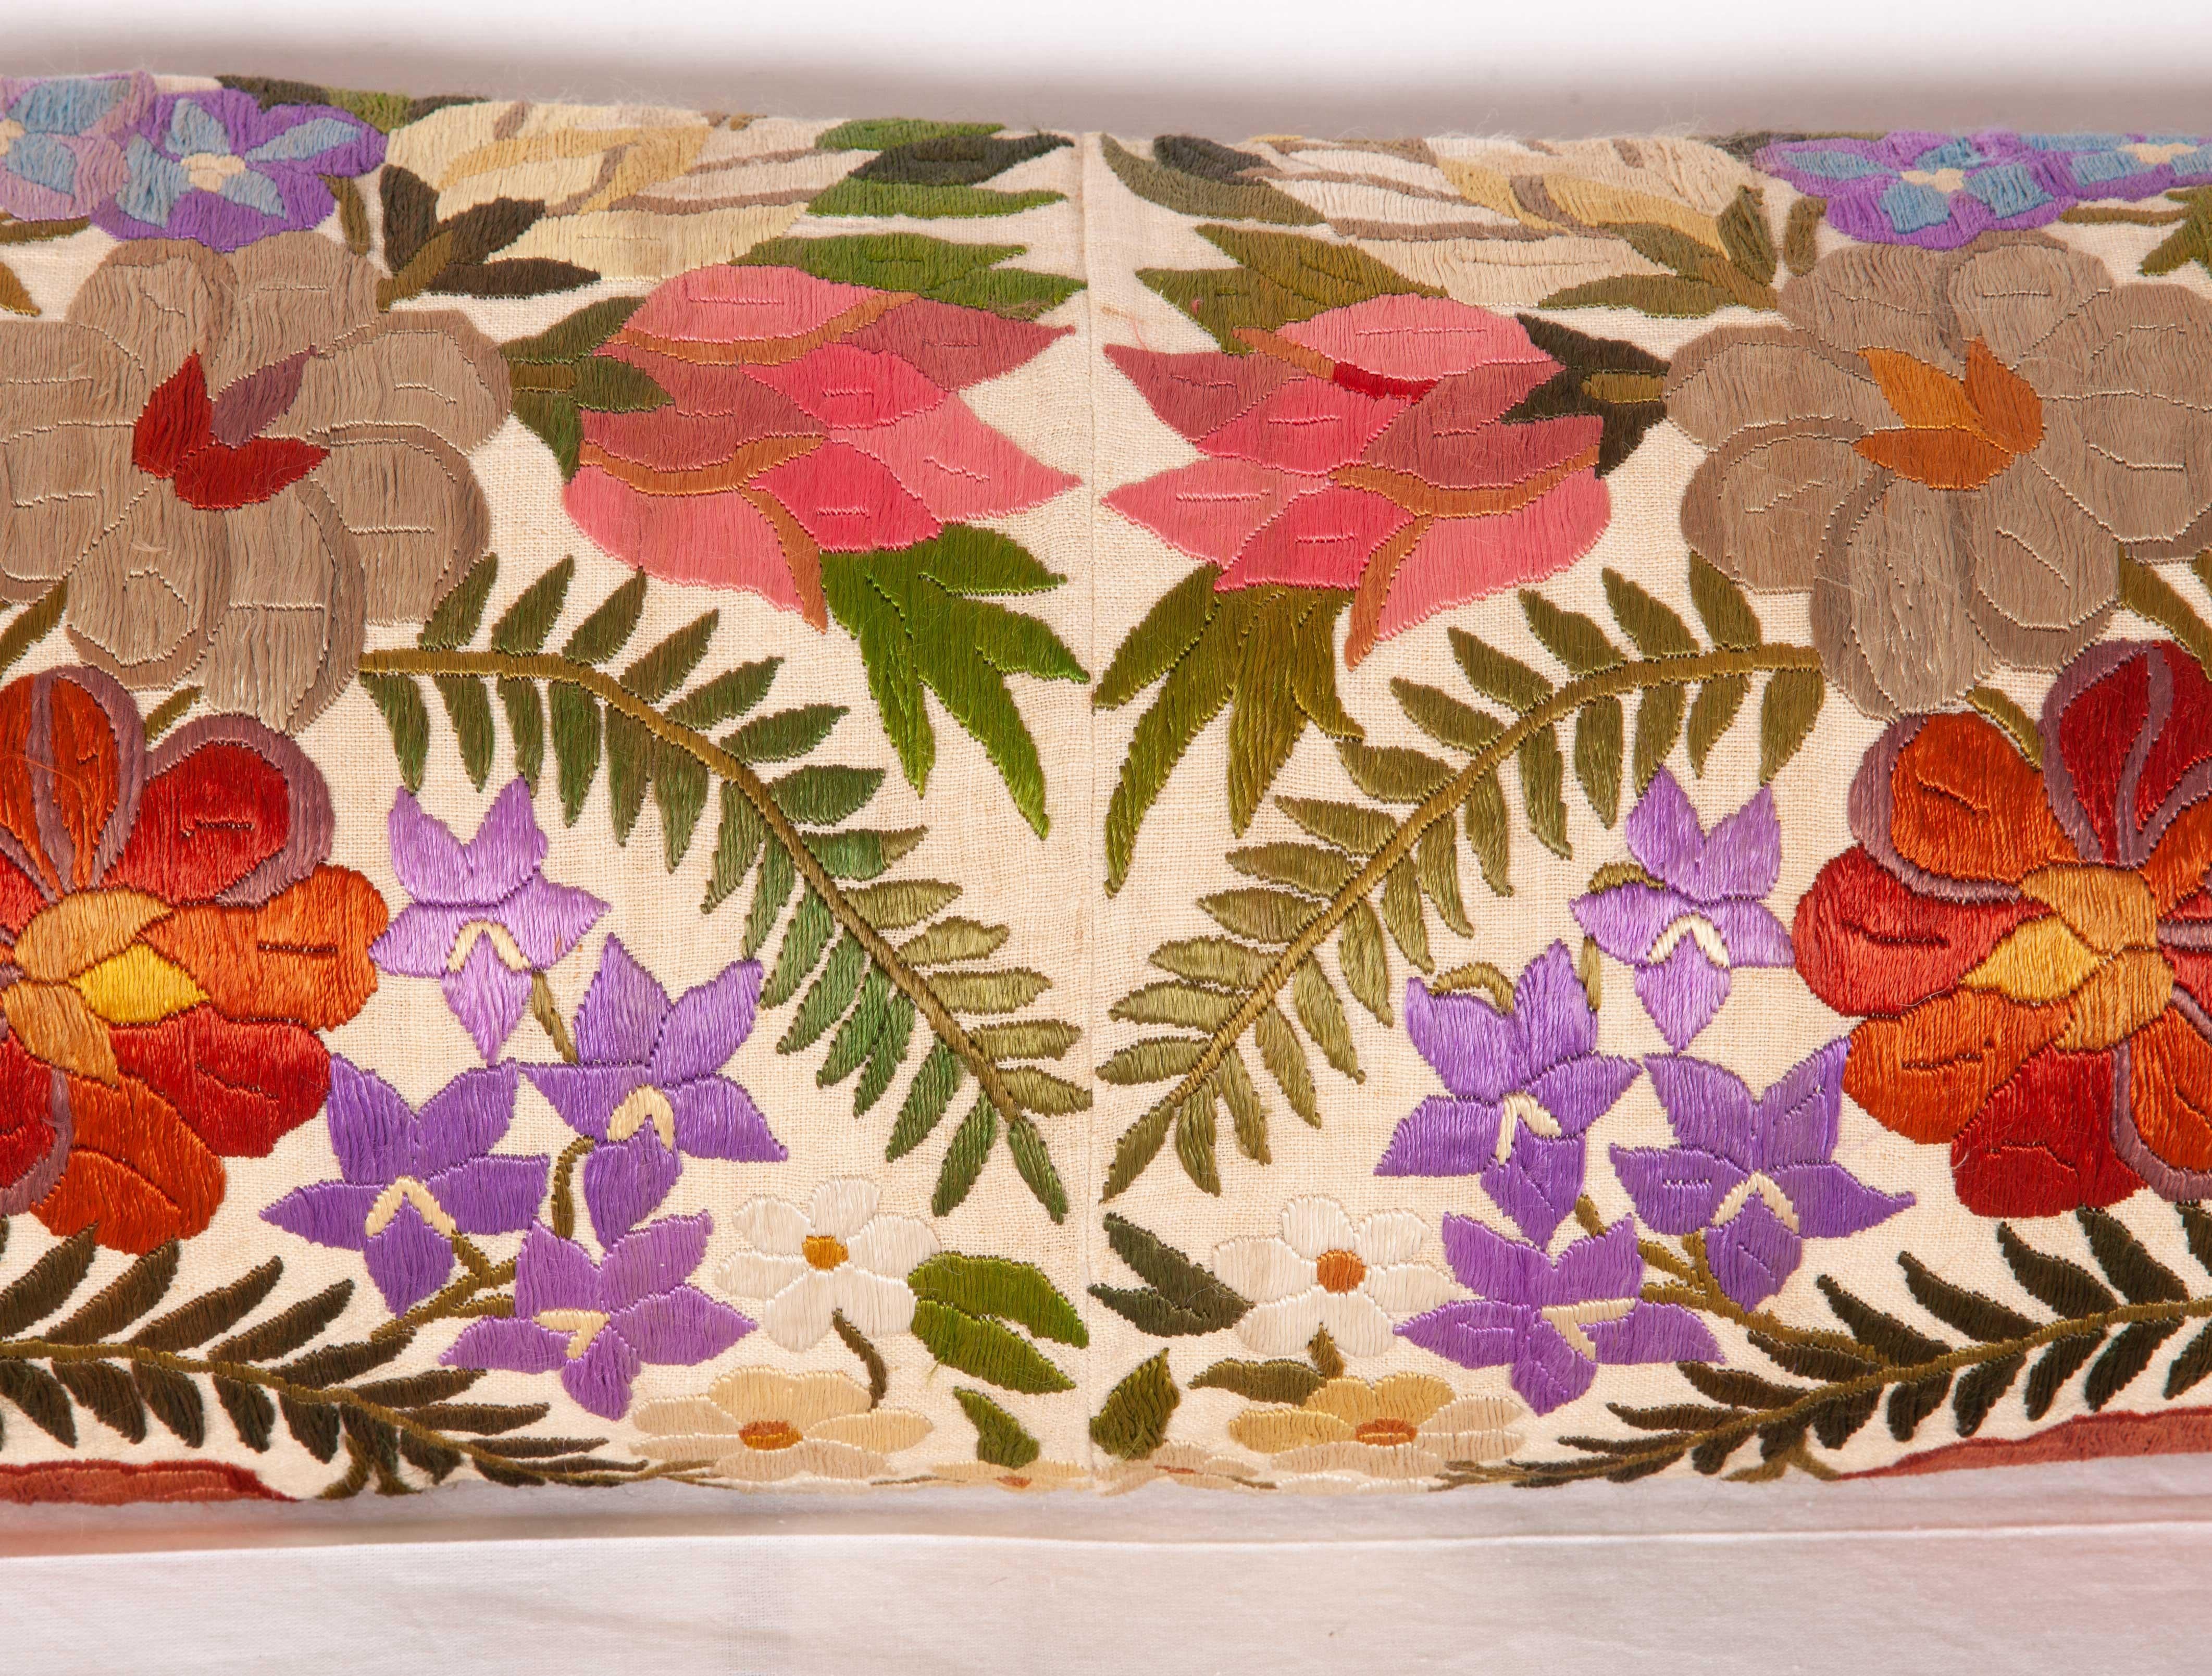 Embroidered Lumbar Pillow Case Fashioned from an Early 20th Century Indian Embroidery